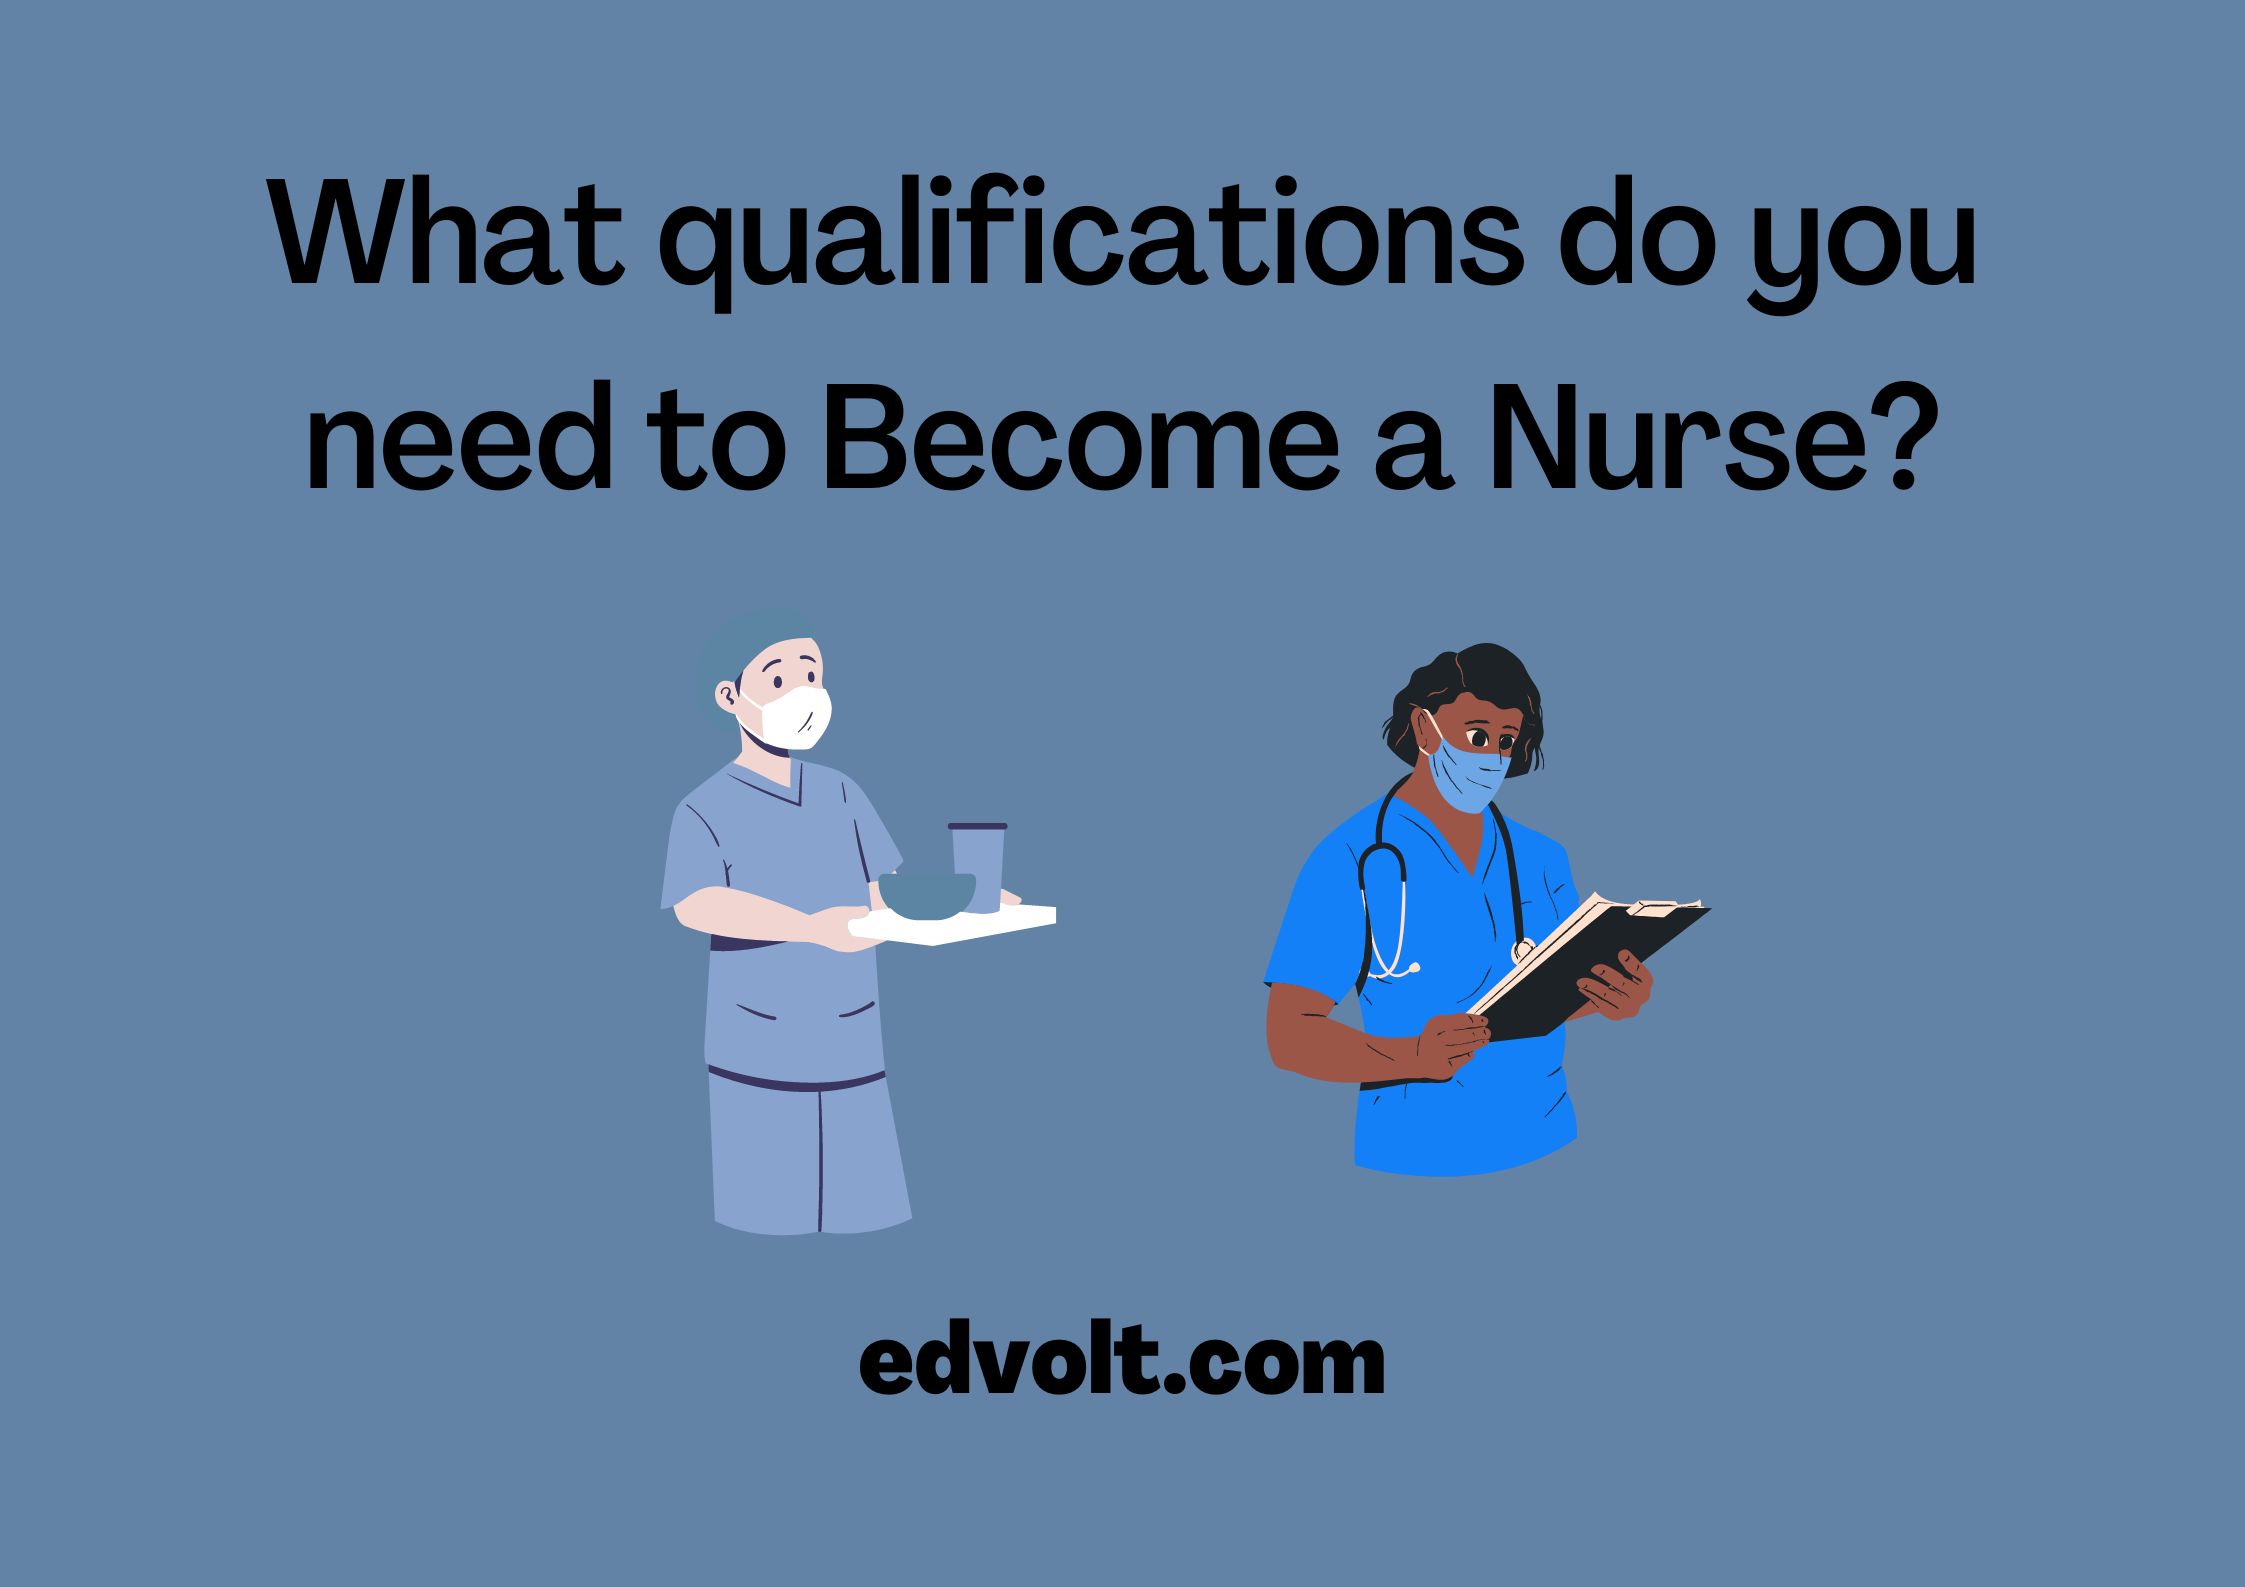 What qualifications do you need to Become a Nurse?